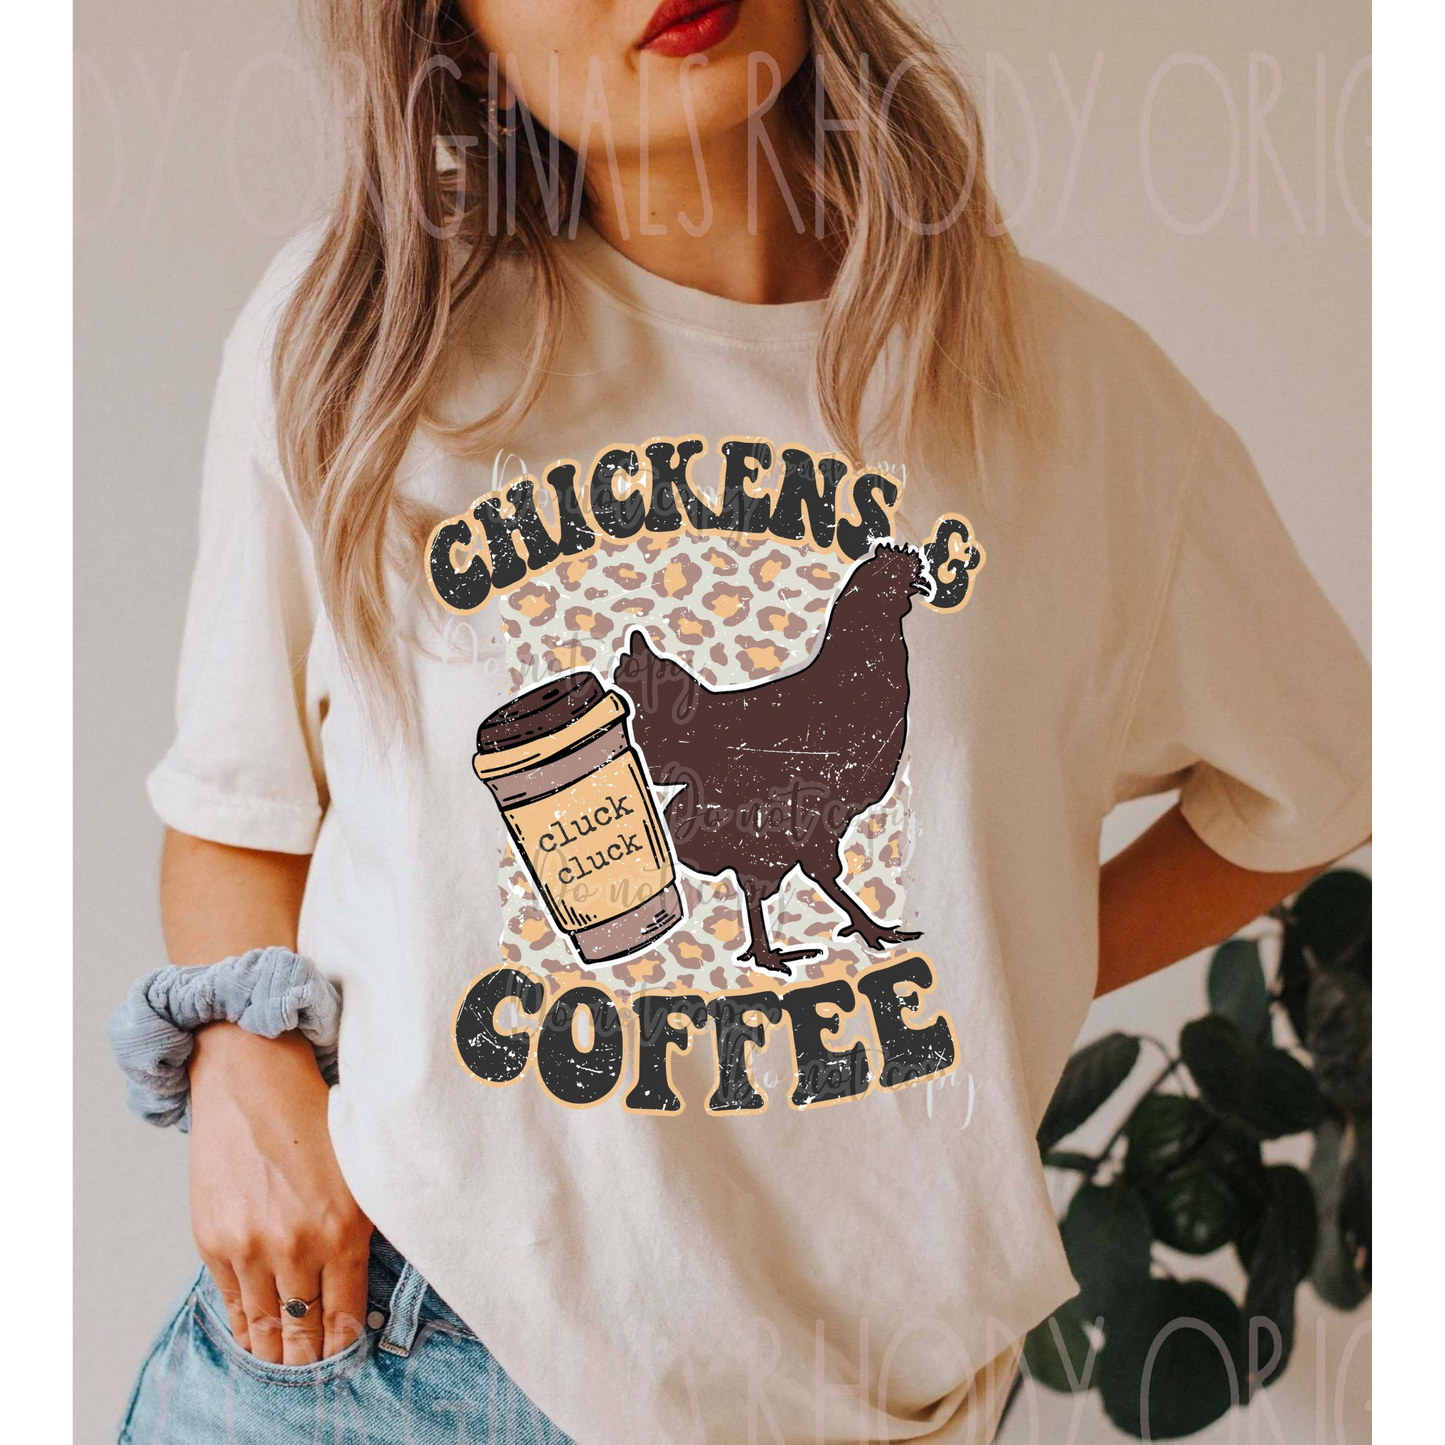 CHICKENS AND COFFEE